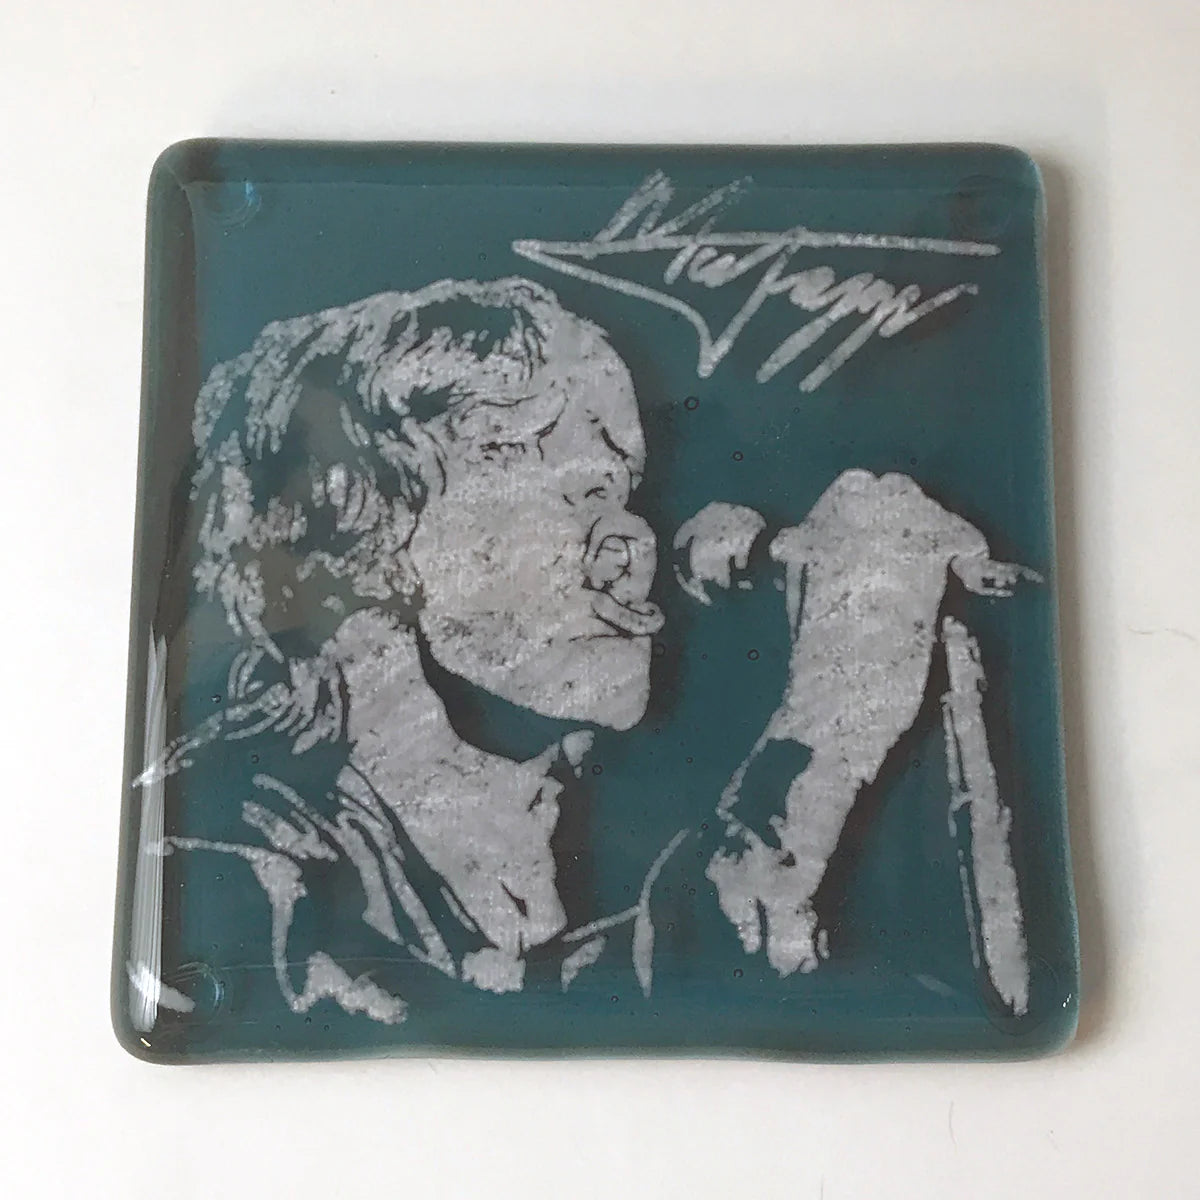 MICK JAGGER FUSED GLASS COASTER